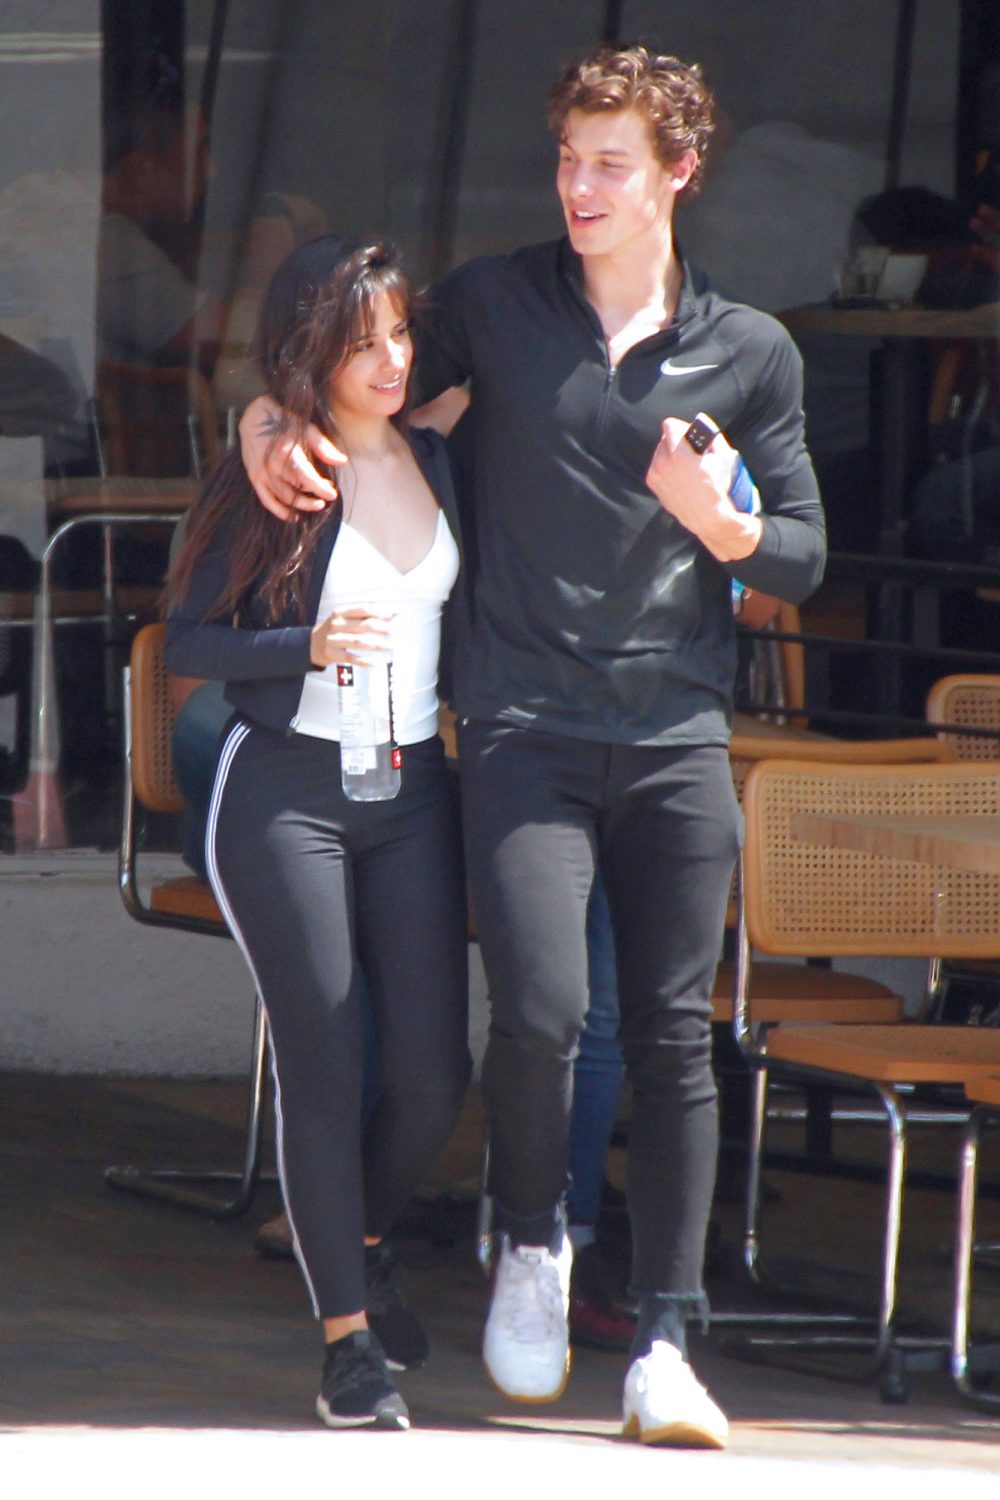 Shawn Mendes and Camila Cabello Chemistry Undeniable in Senorita Rehearsal Video Walking Arm Around Each Other